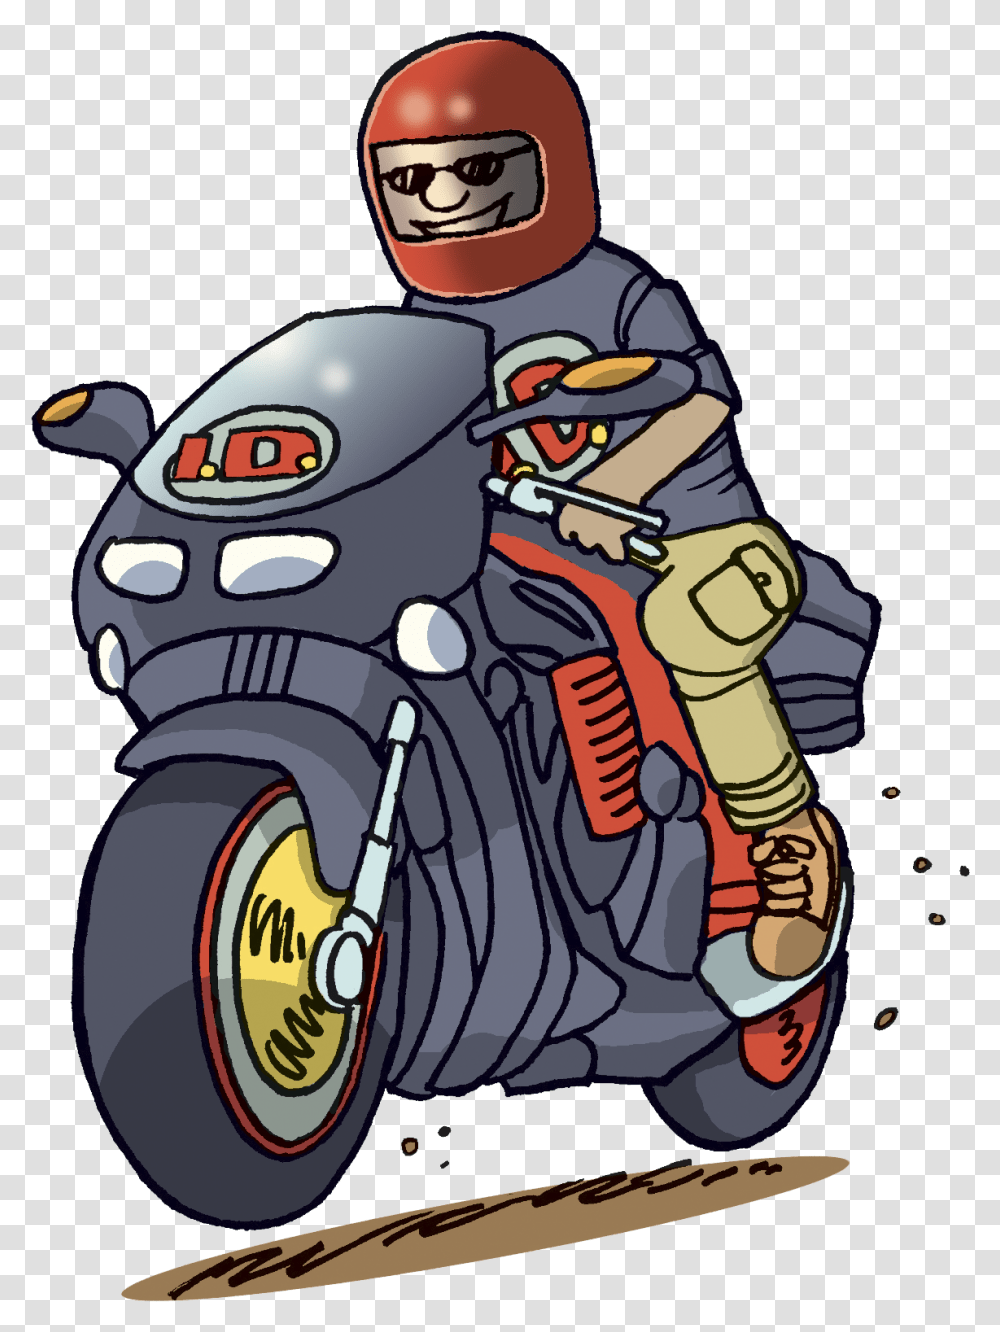 Free Motorcycle Motorcycle Pictures Graphics 2 Clipart Motorcycle Clip Art, Vehicle, Transportation, Knight, Scooter Transparent Png